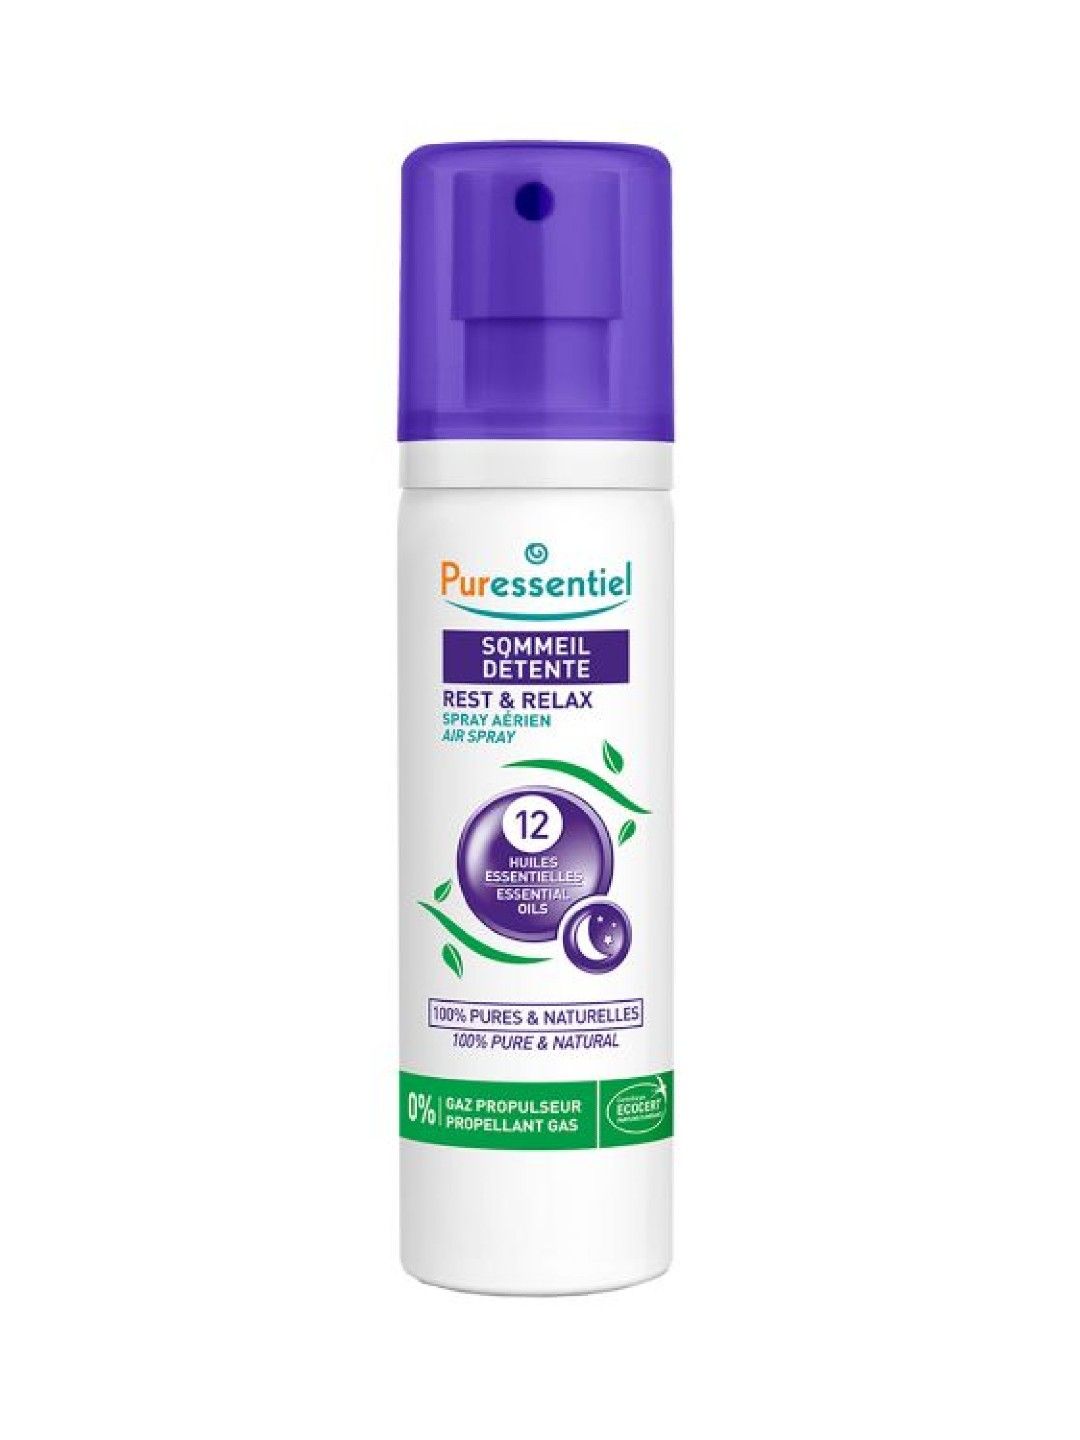 Puressentiel Rest and Relax Air Spray